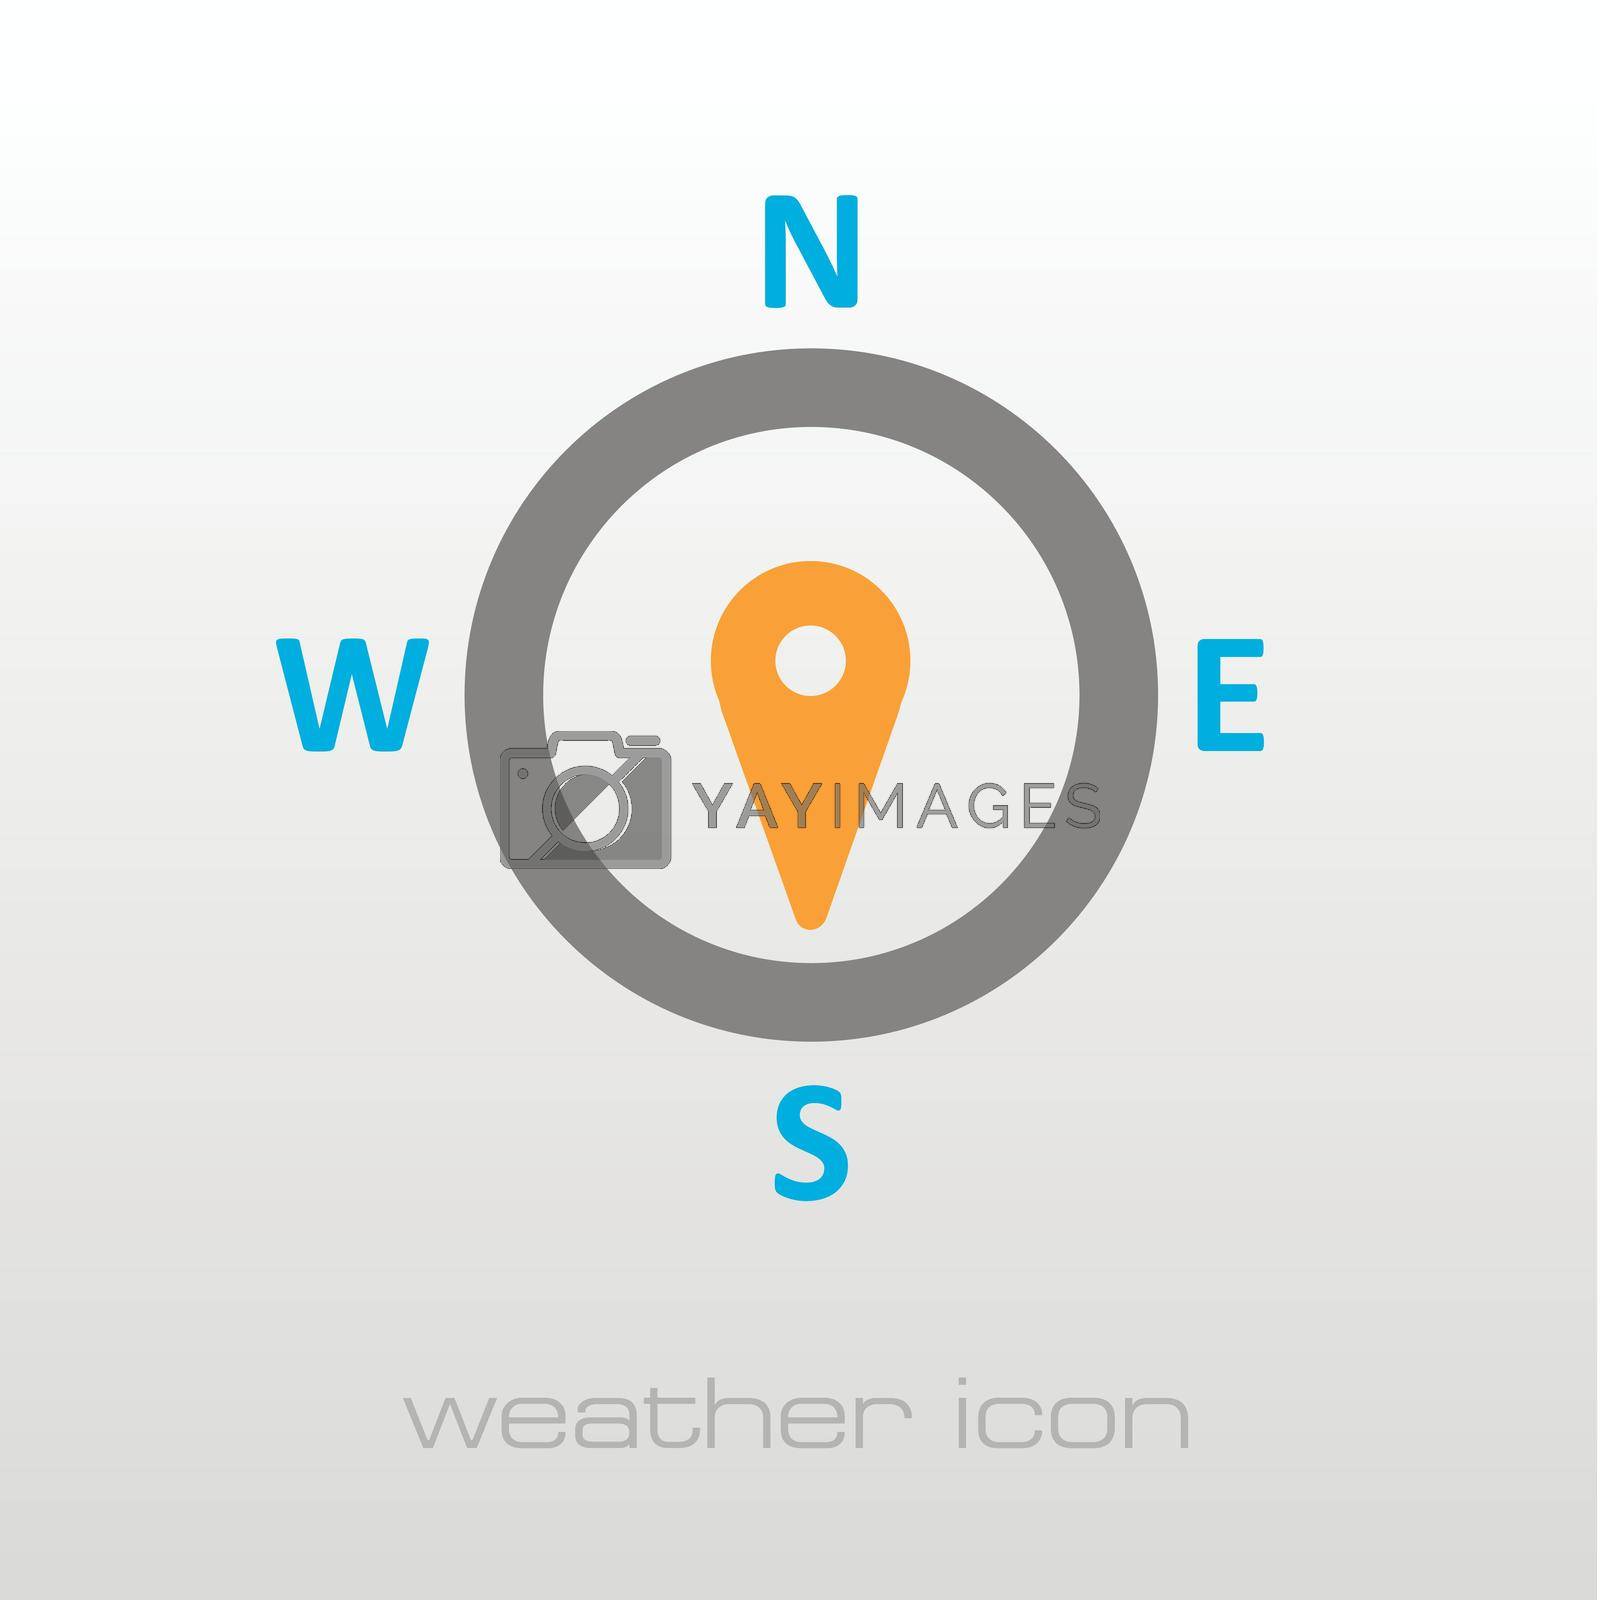 Compass wind rose outline icon. Direction south. Meteorology. Weather. Vector illustration eps 10